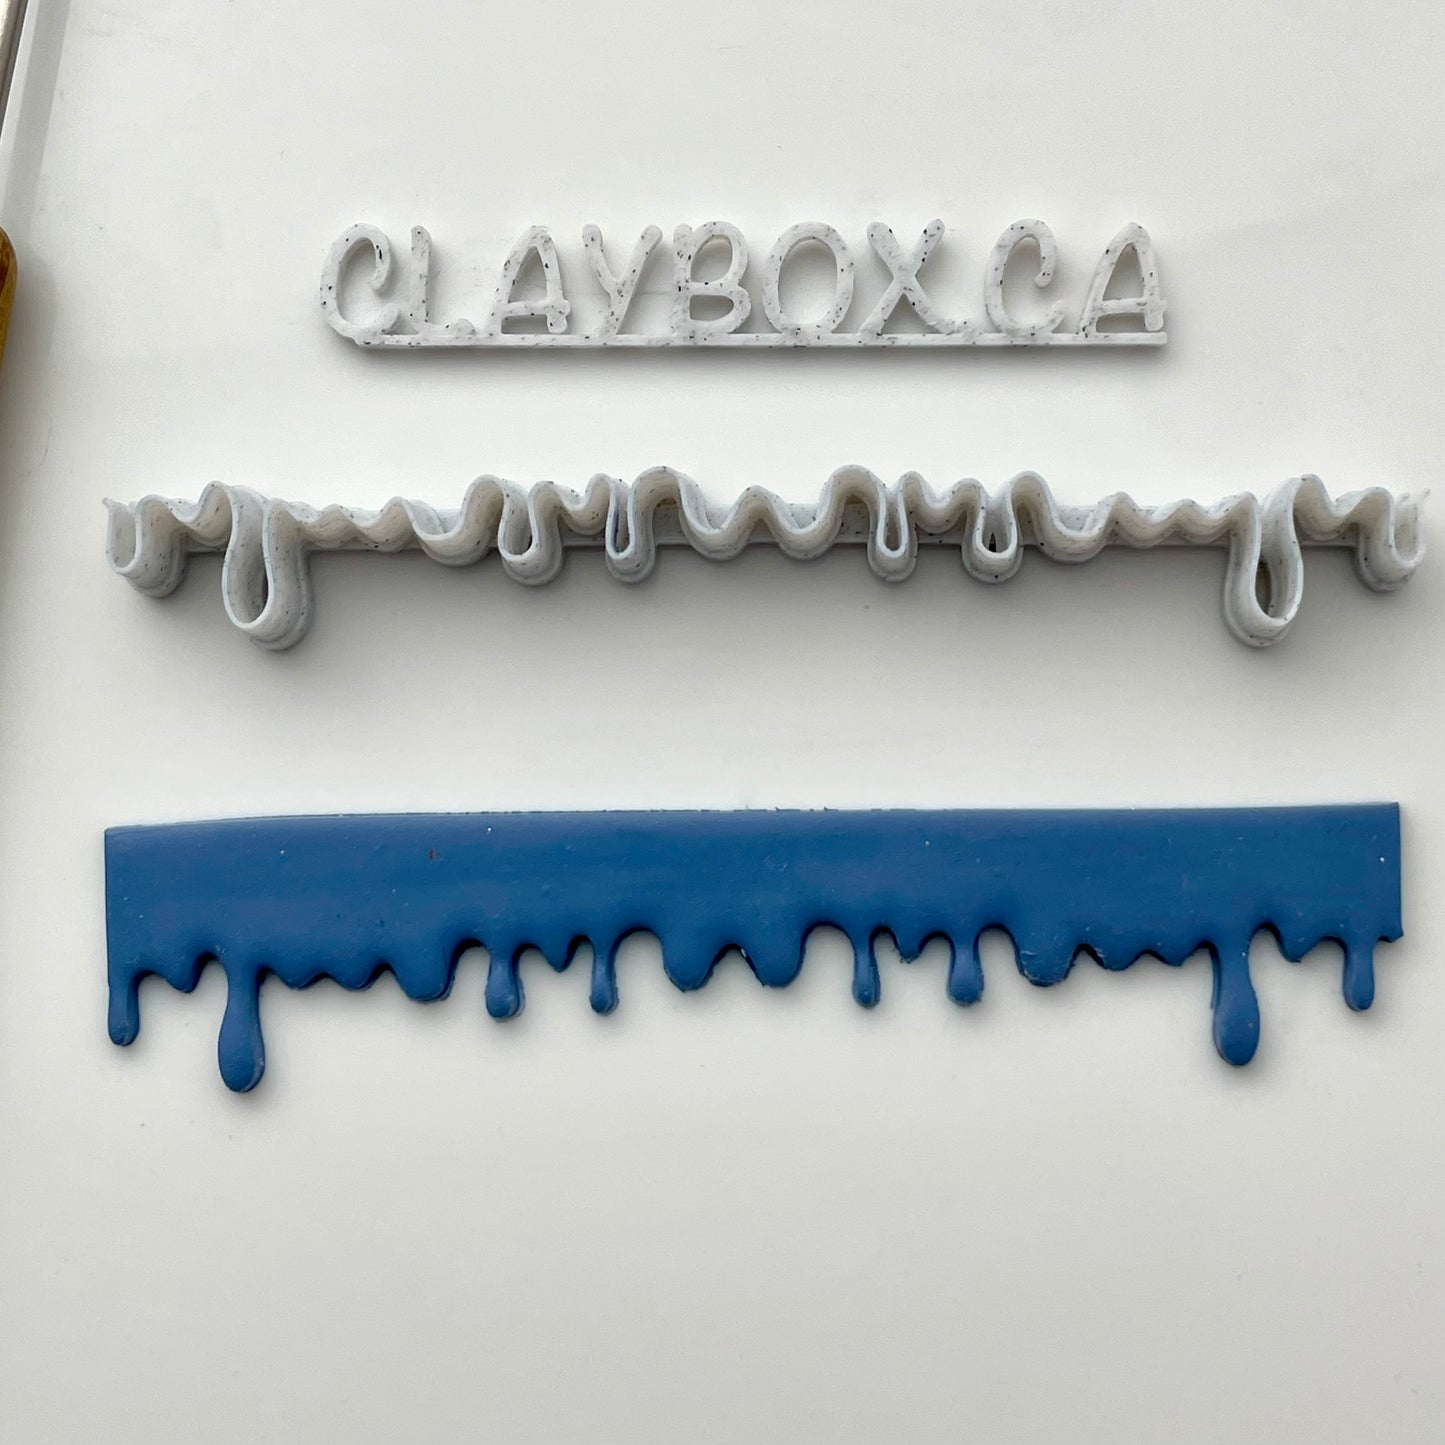 Decorative edge cutters - made for polymer clay